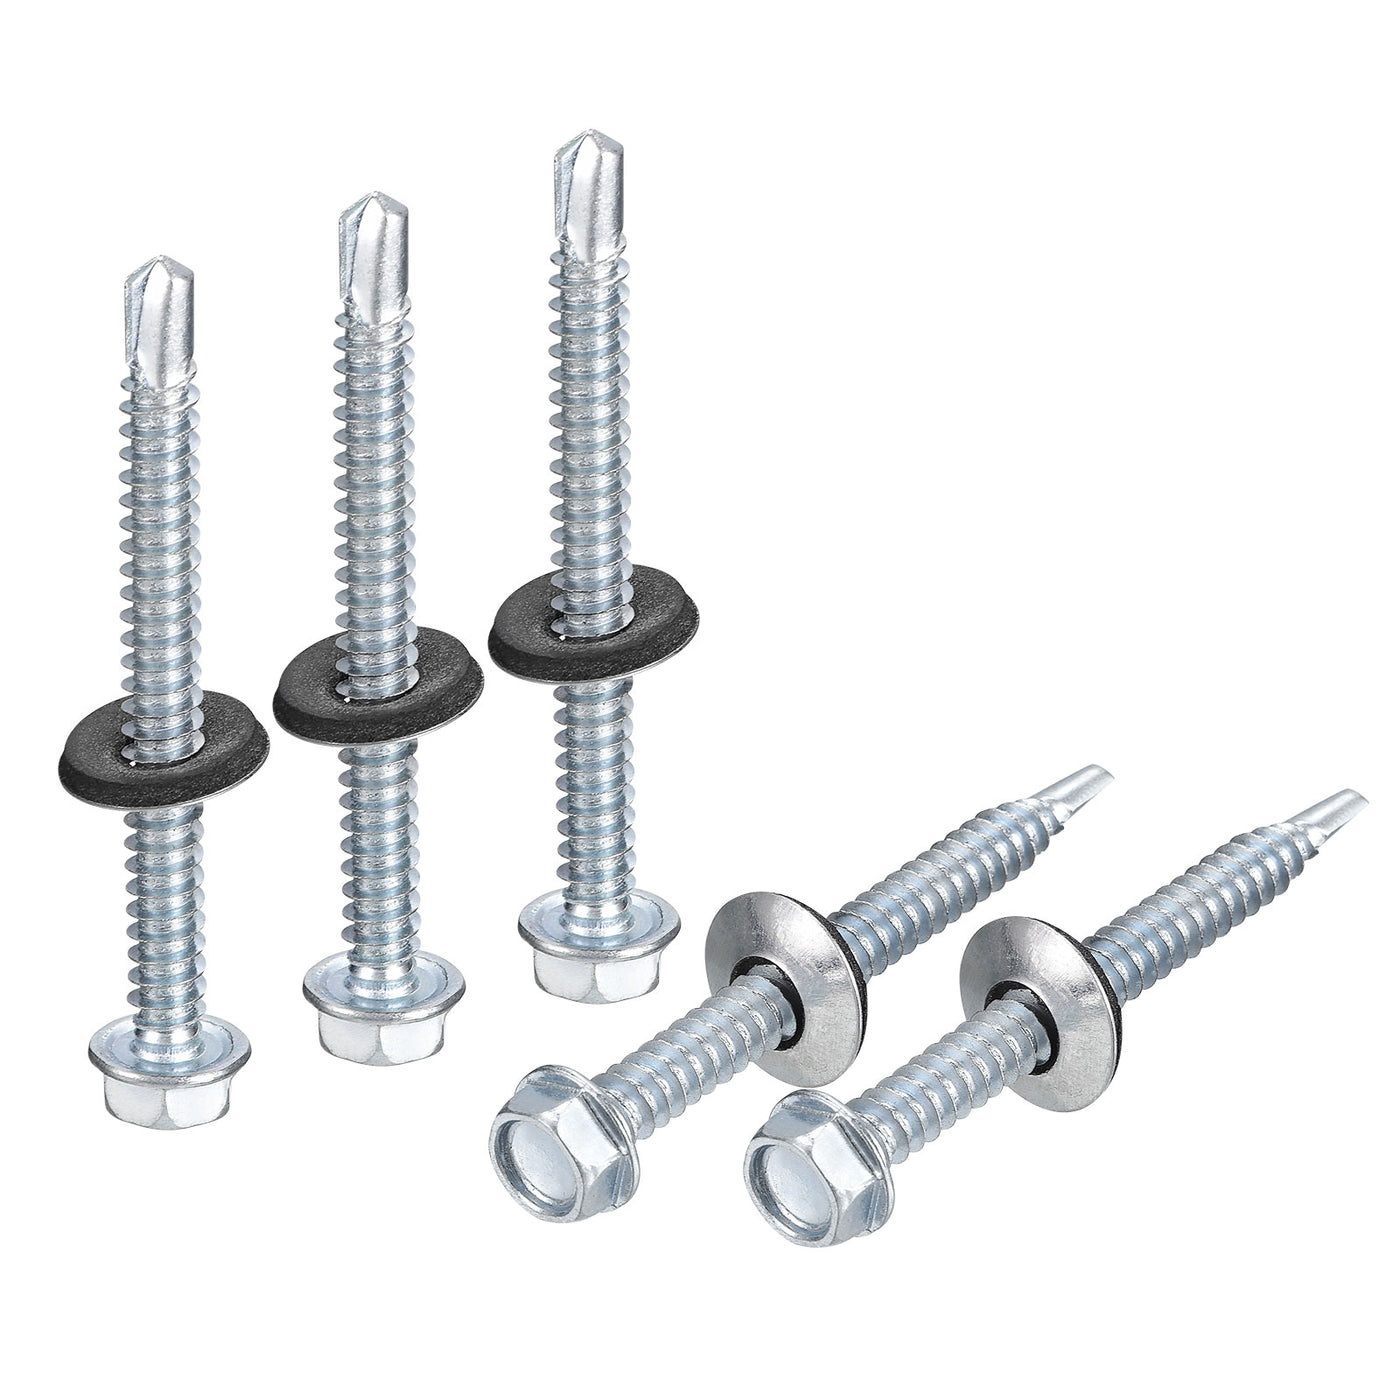 uxcell Uxcell #14 x 2-1/2" Self Drilling Screws, 25pcs Roofing Screws with EPDM Washer